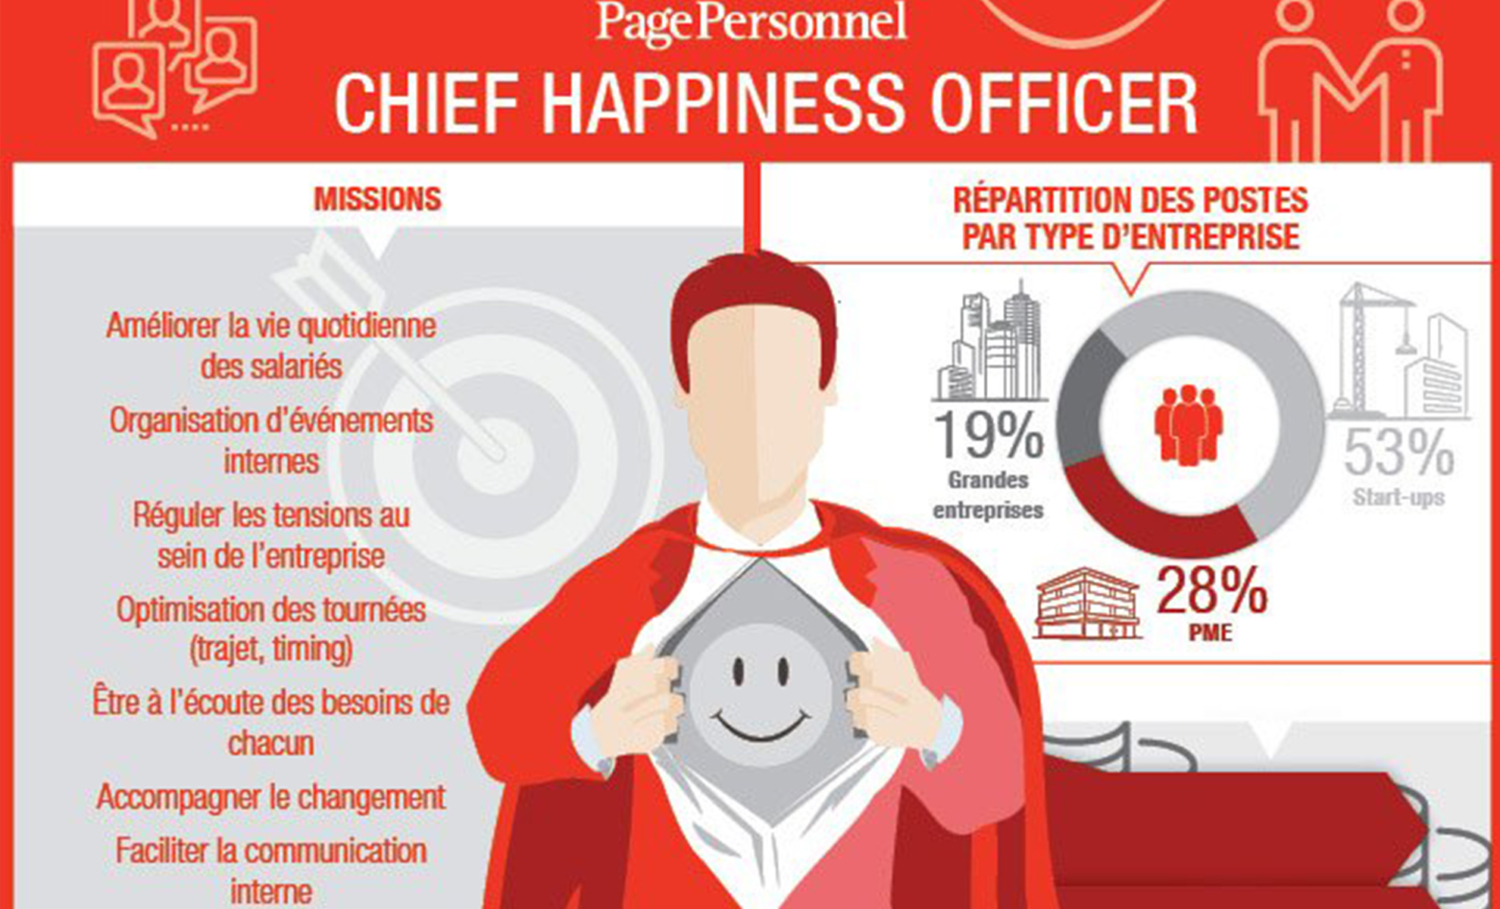 missions du chief happiness officer